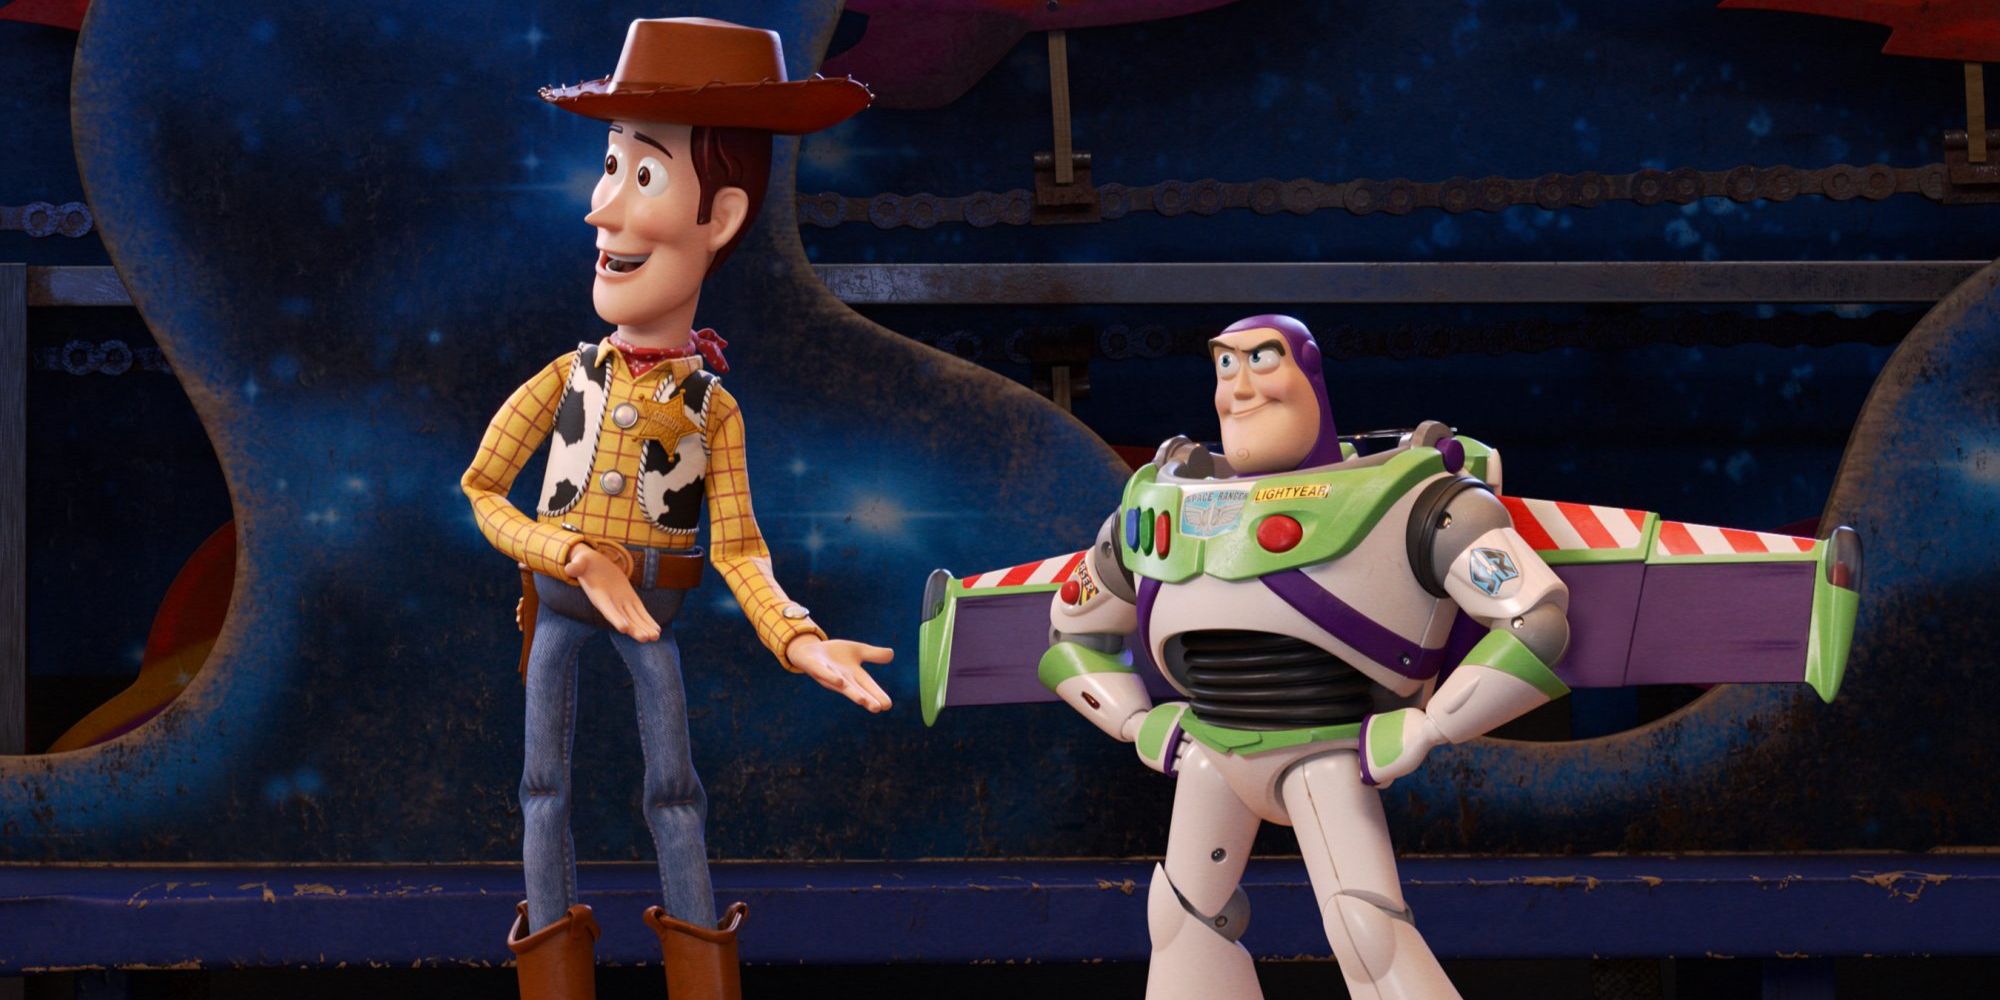 Woody gestures to Buzz Lightyear in Toy Story 4